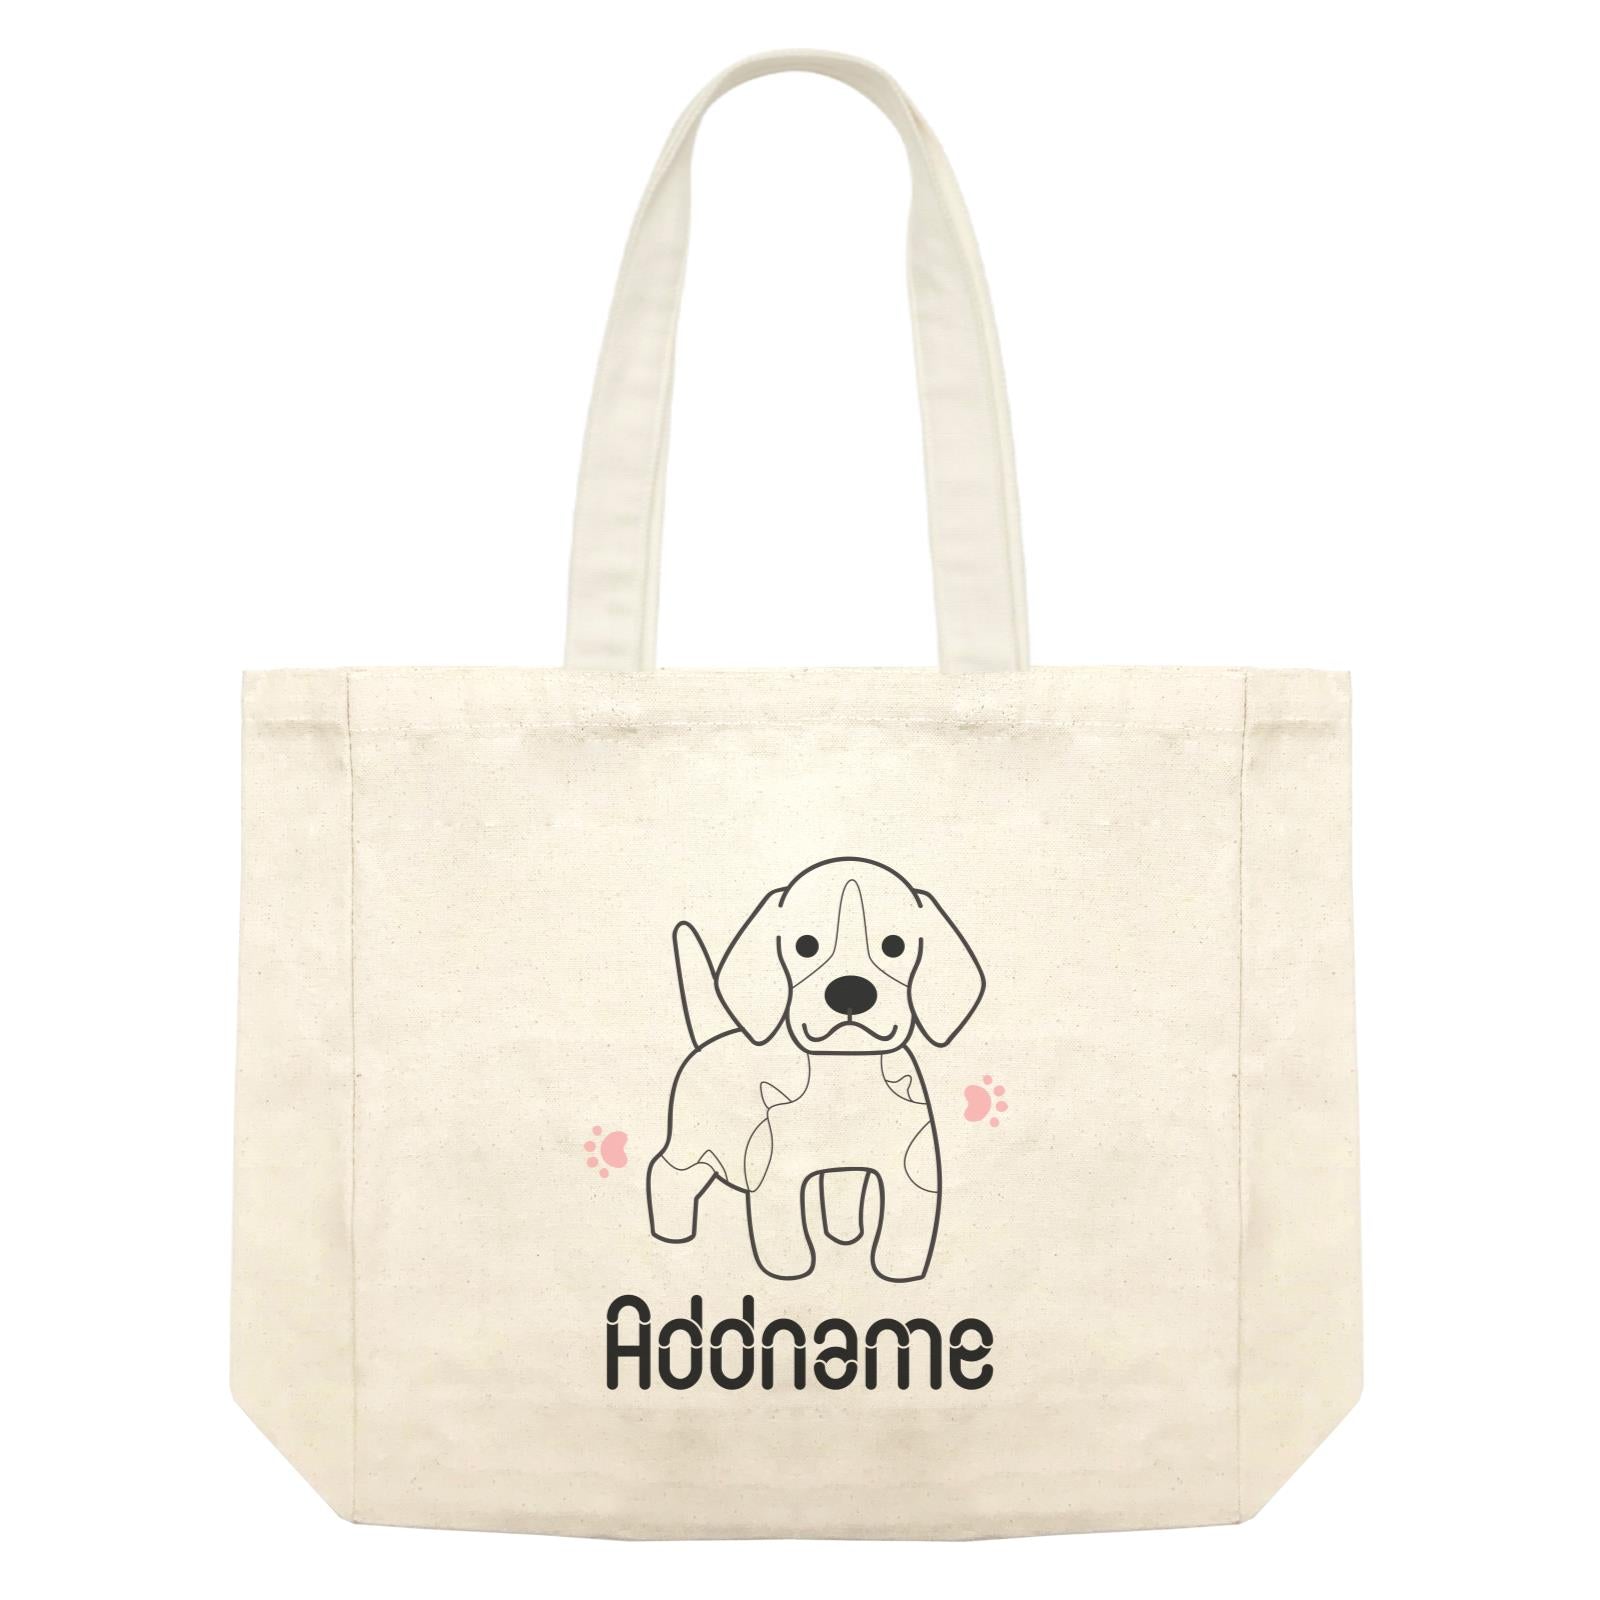 Coloring Outline Cute Hand Drawn Animals Dogs Beagle Addname Shopping Bag